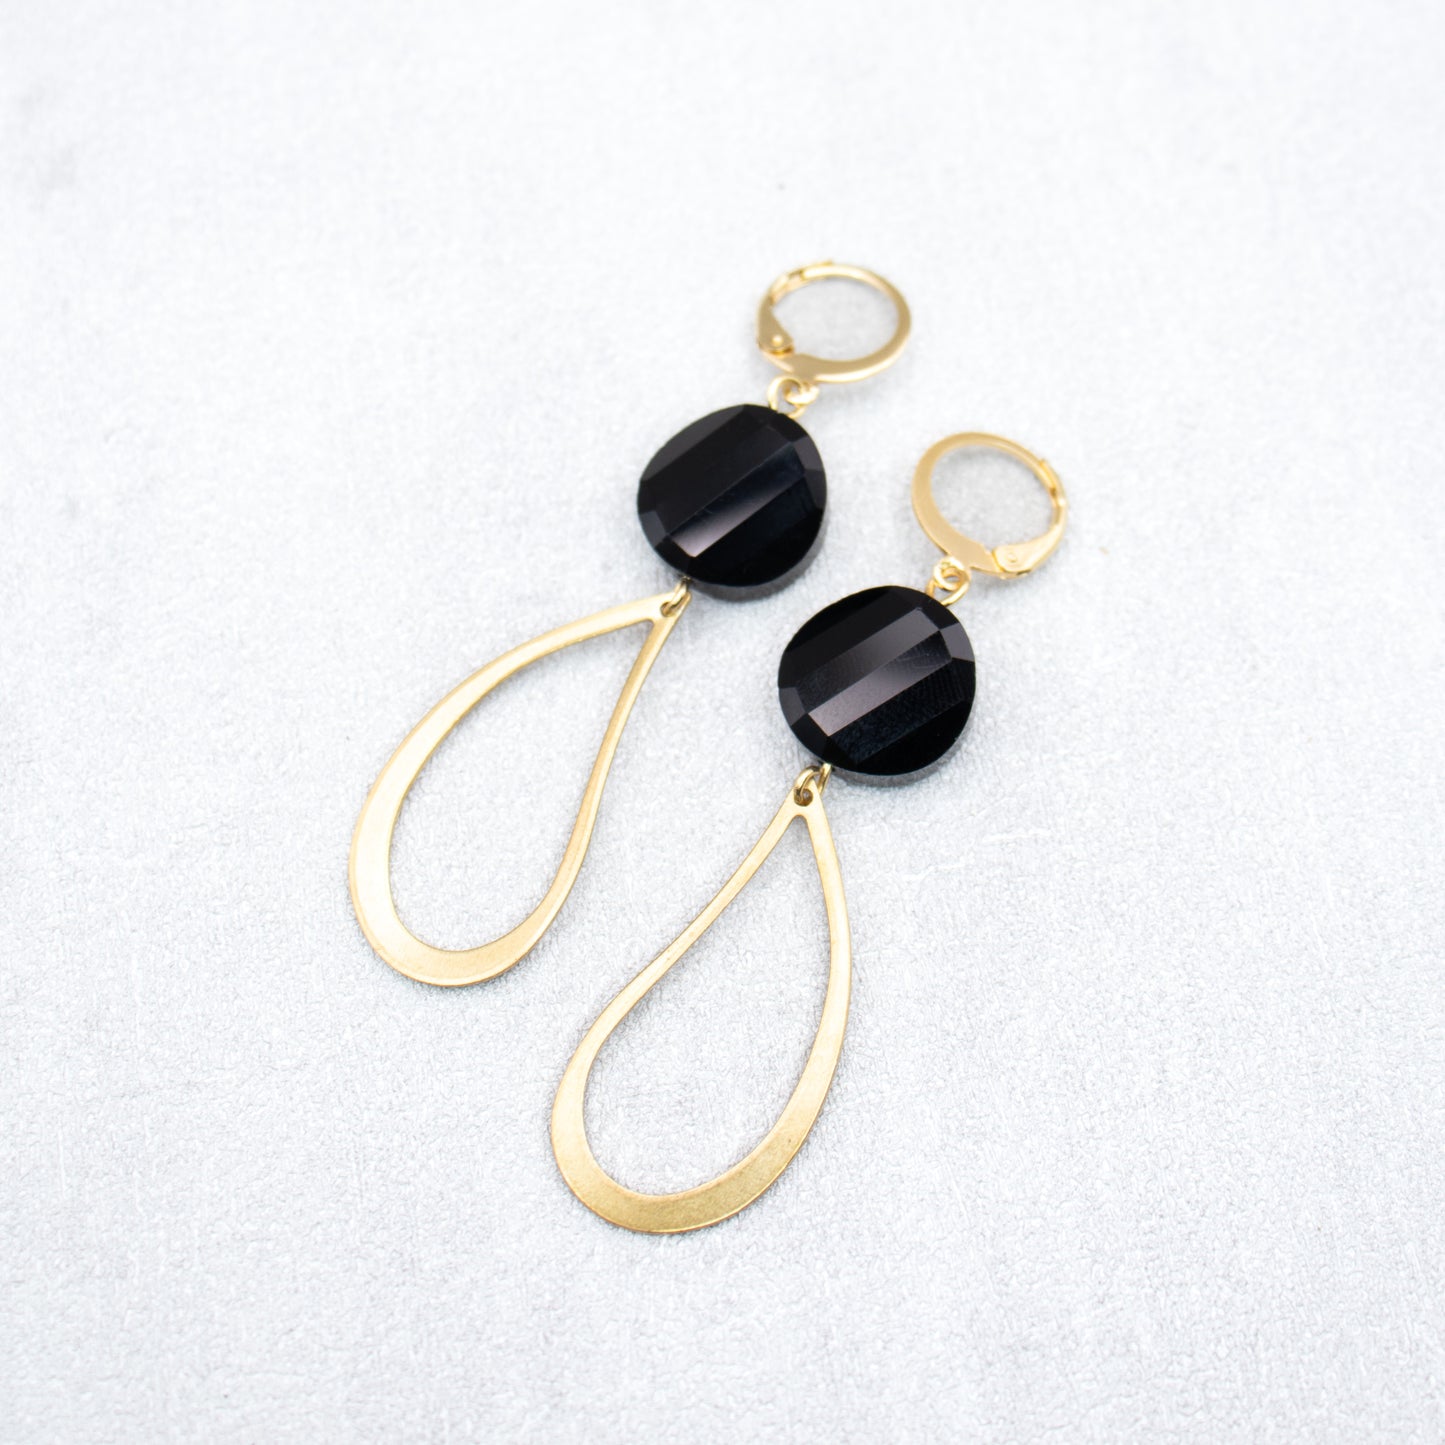 Black beads with gold charms. Handmade classic earrings.